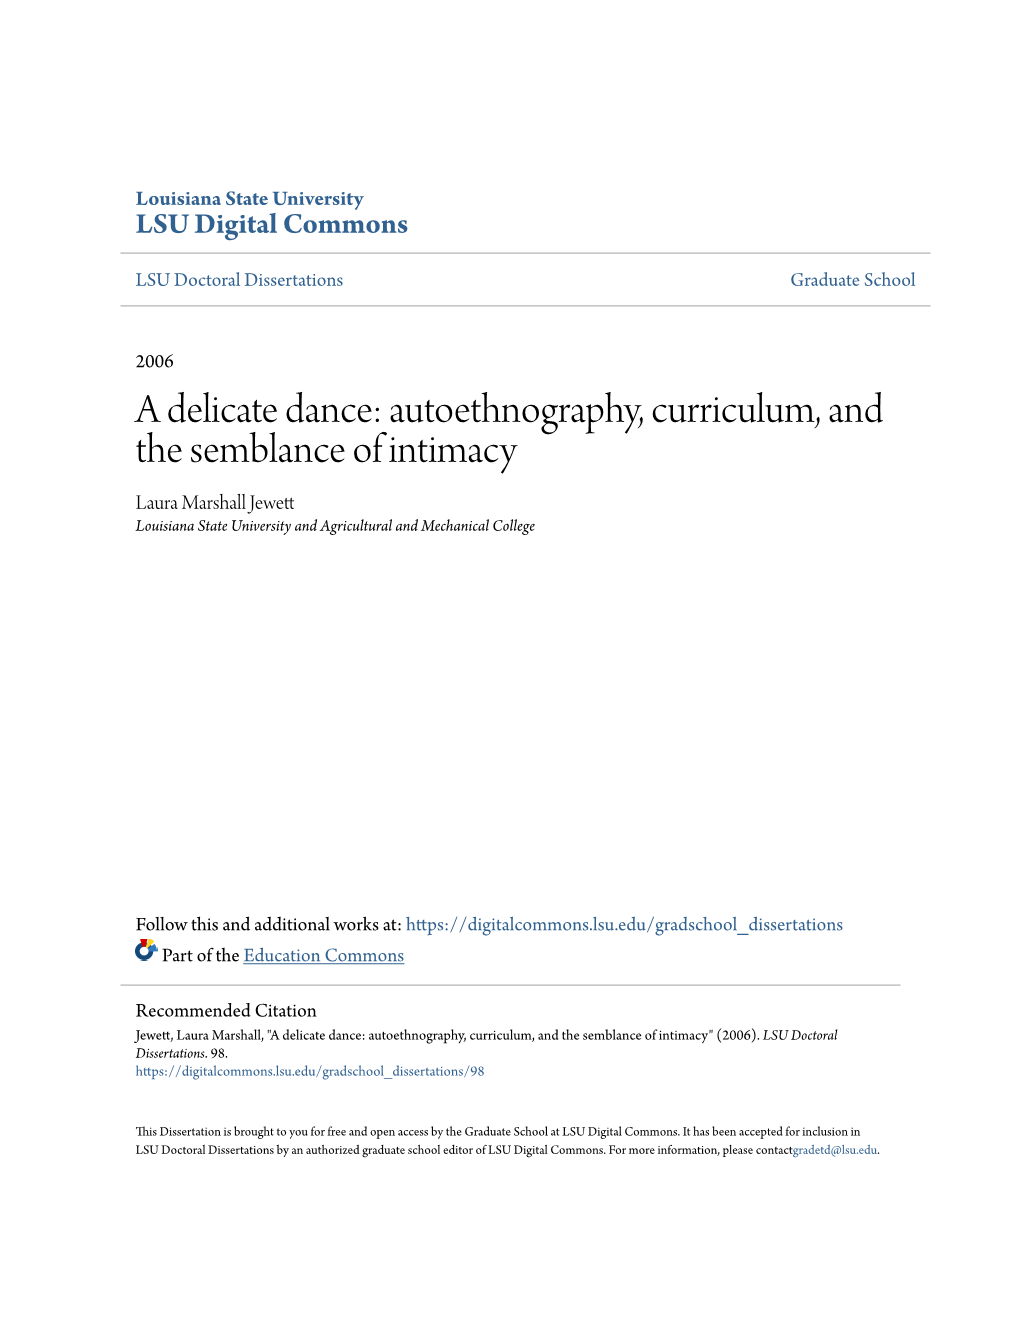 A Delicate Dance: Autoethnography, Curriculum, and the Semblance of Intimacy Laura Marshall Jewett Louisiana State University and Agricultural and Mechanical College